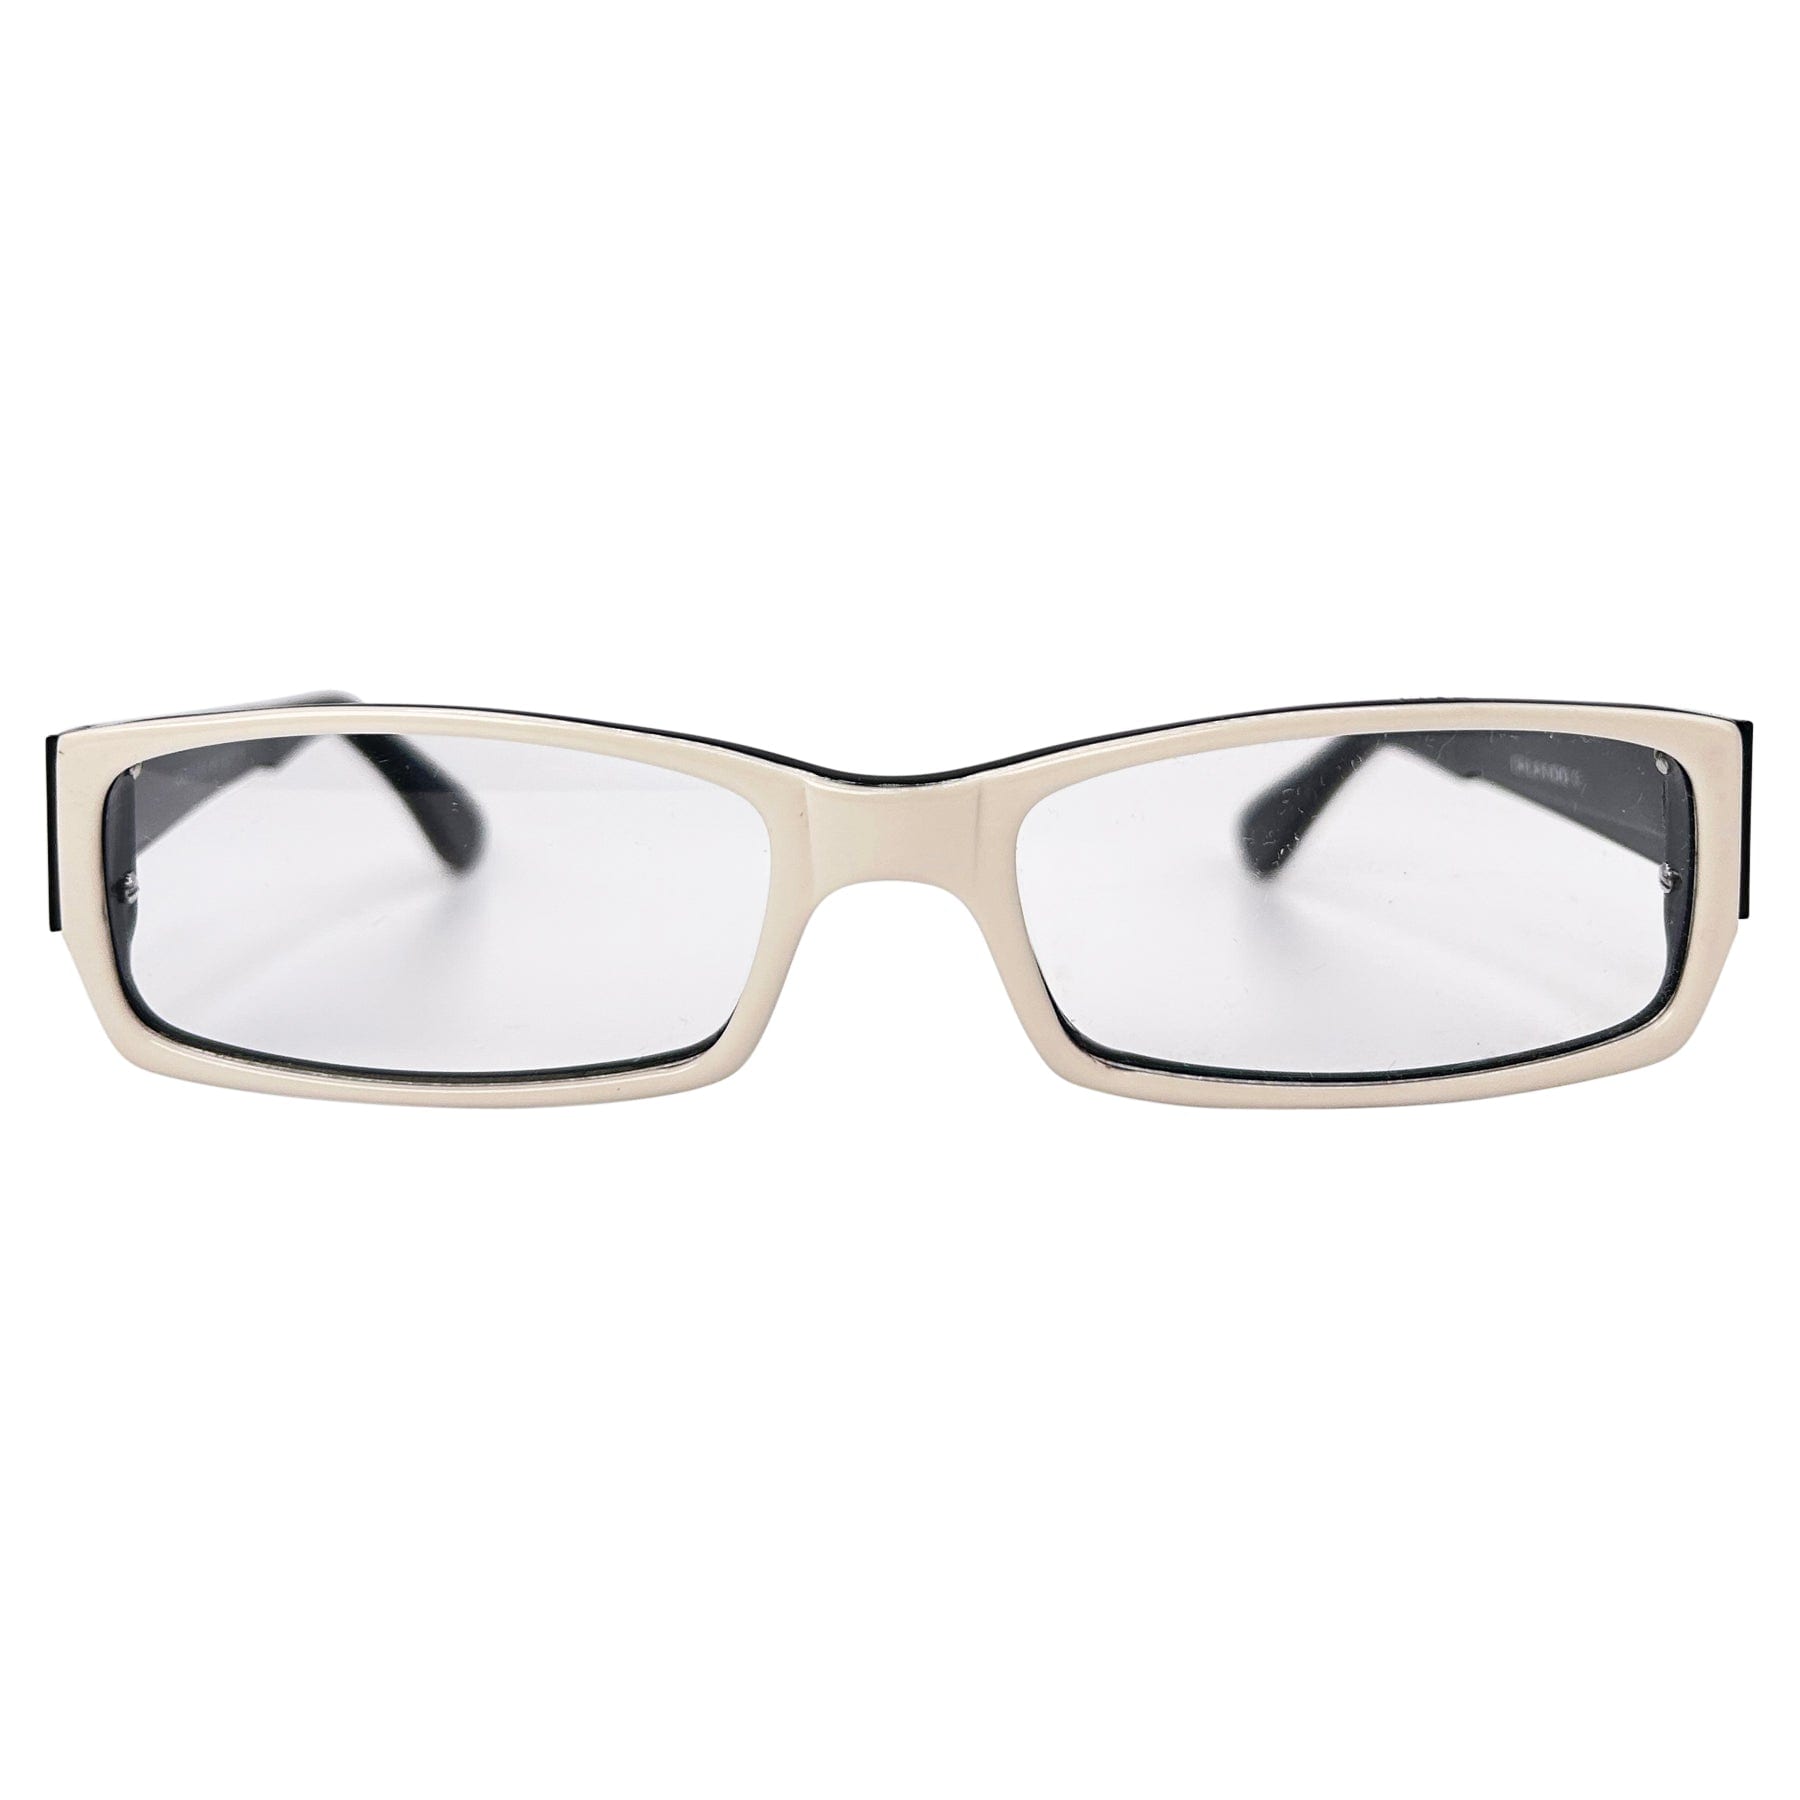 white color glasses with a rectangular 90s style frame